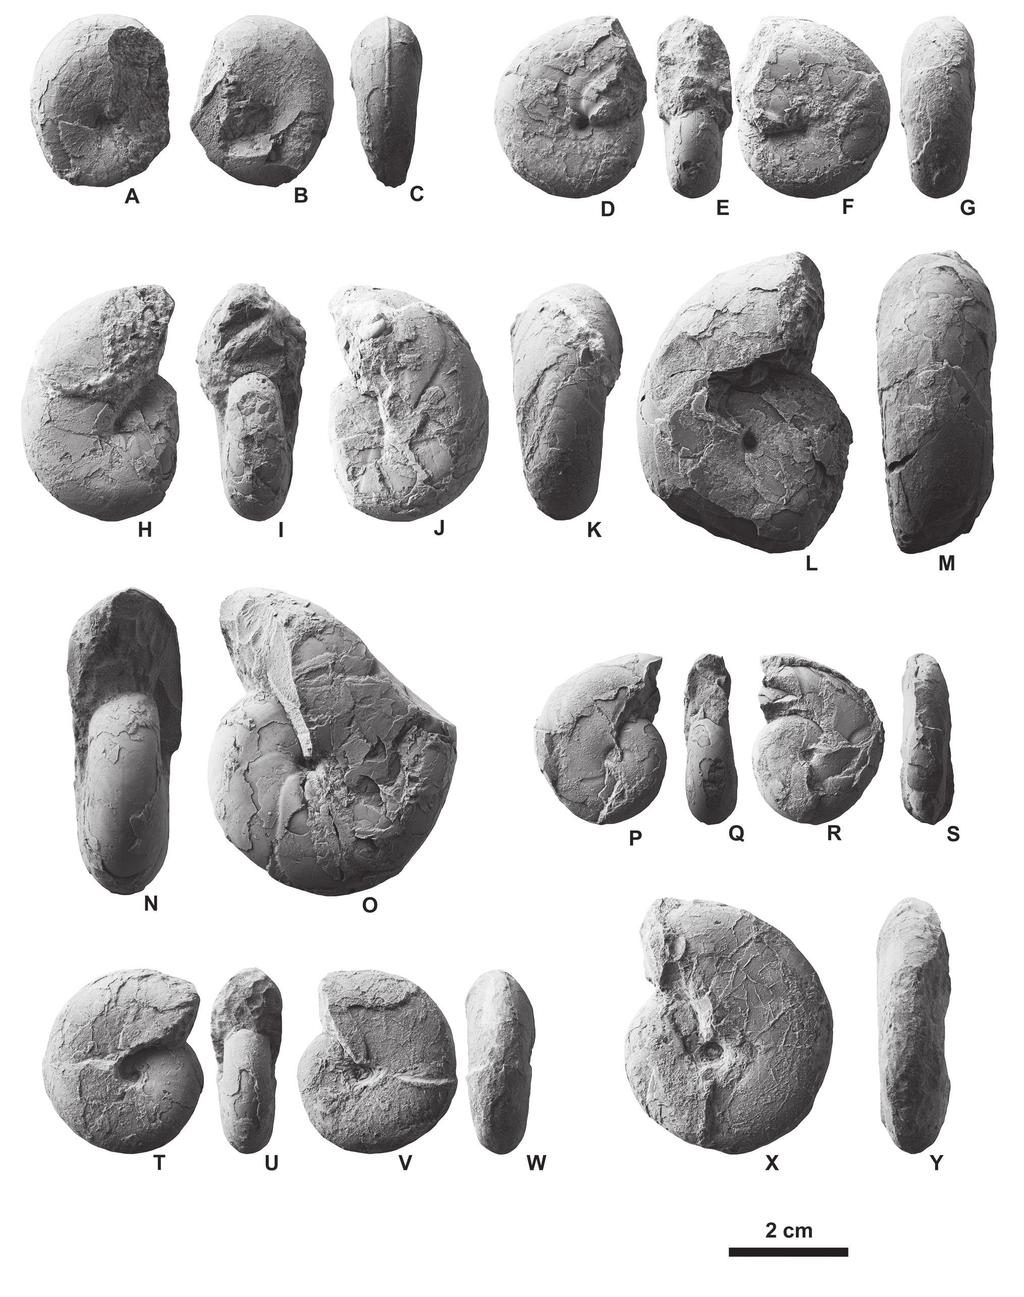 Campanian "Soya Fauna" ammonoids from Hidaka Figure 3. Damesites and Desmophyllites from float concretions found in a small tributary of the Pankeushappu River in the Hidaka area, Hokkaido.